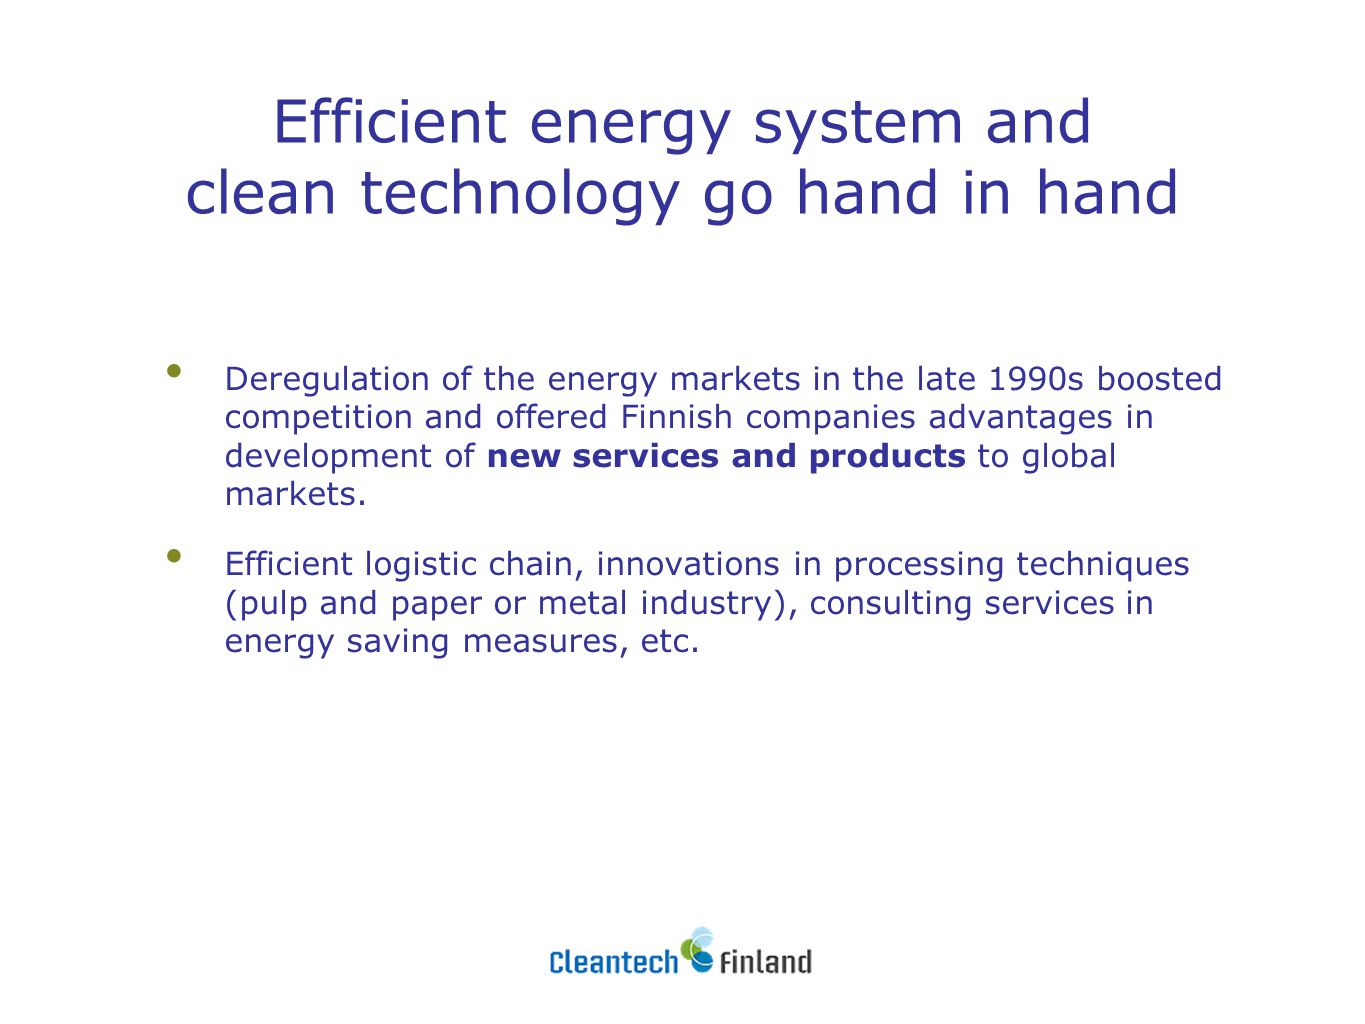 Deregulation of the energy markets in the late 1990s boosted competition and offered Finnish companies advantages in development of new services and products to global markets.